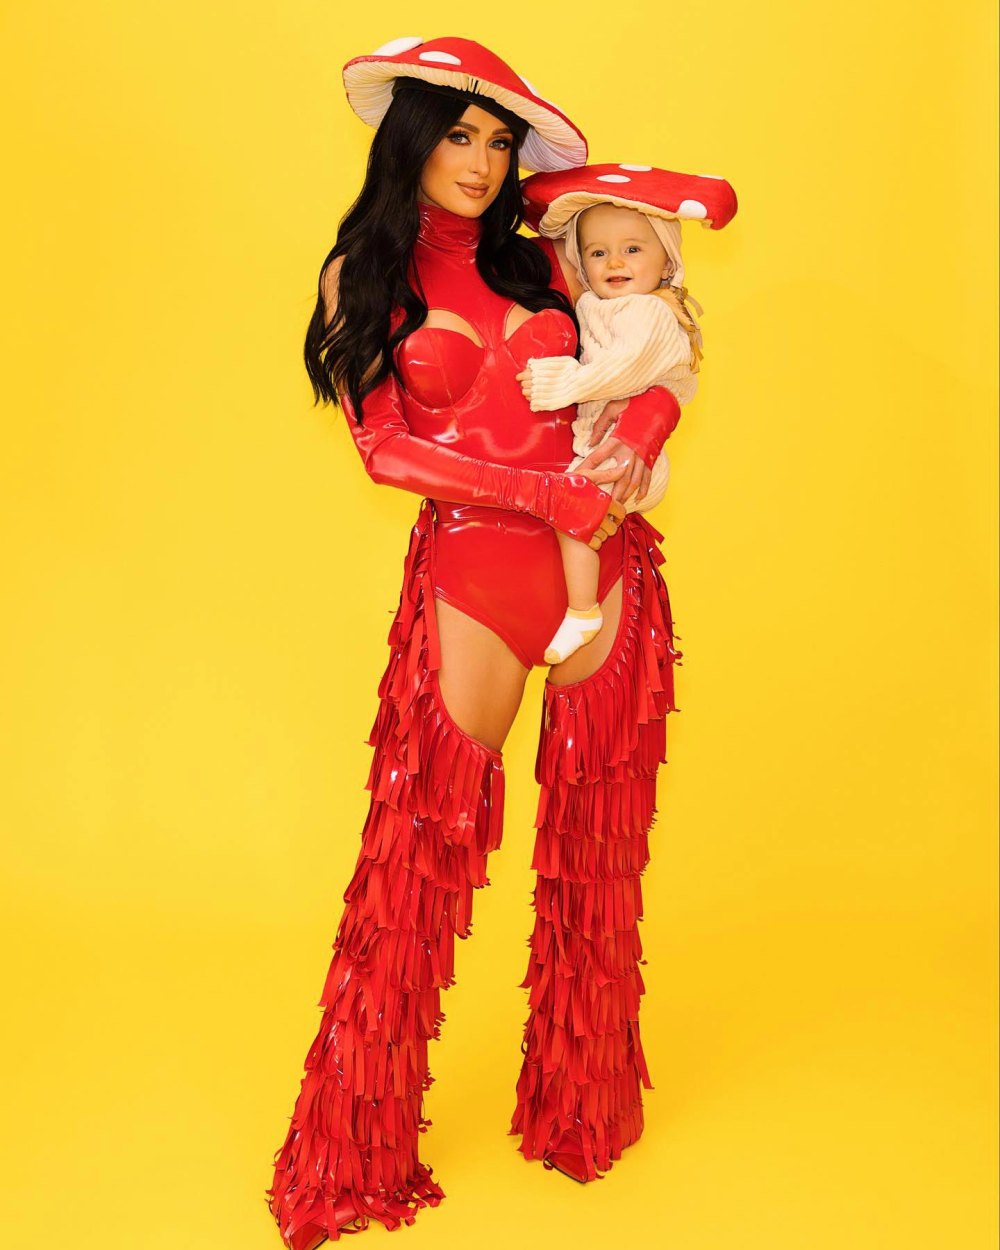 Paris Hilton Has a Ton of Fungi With Family in Katy Perry-Inspired Halloween Outfits 627